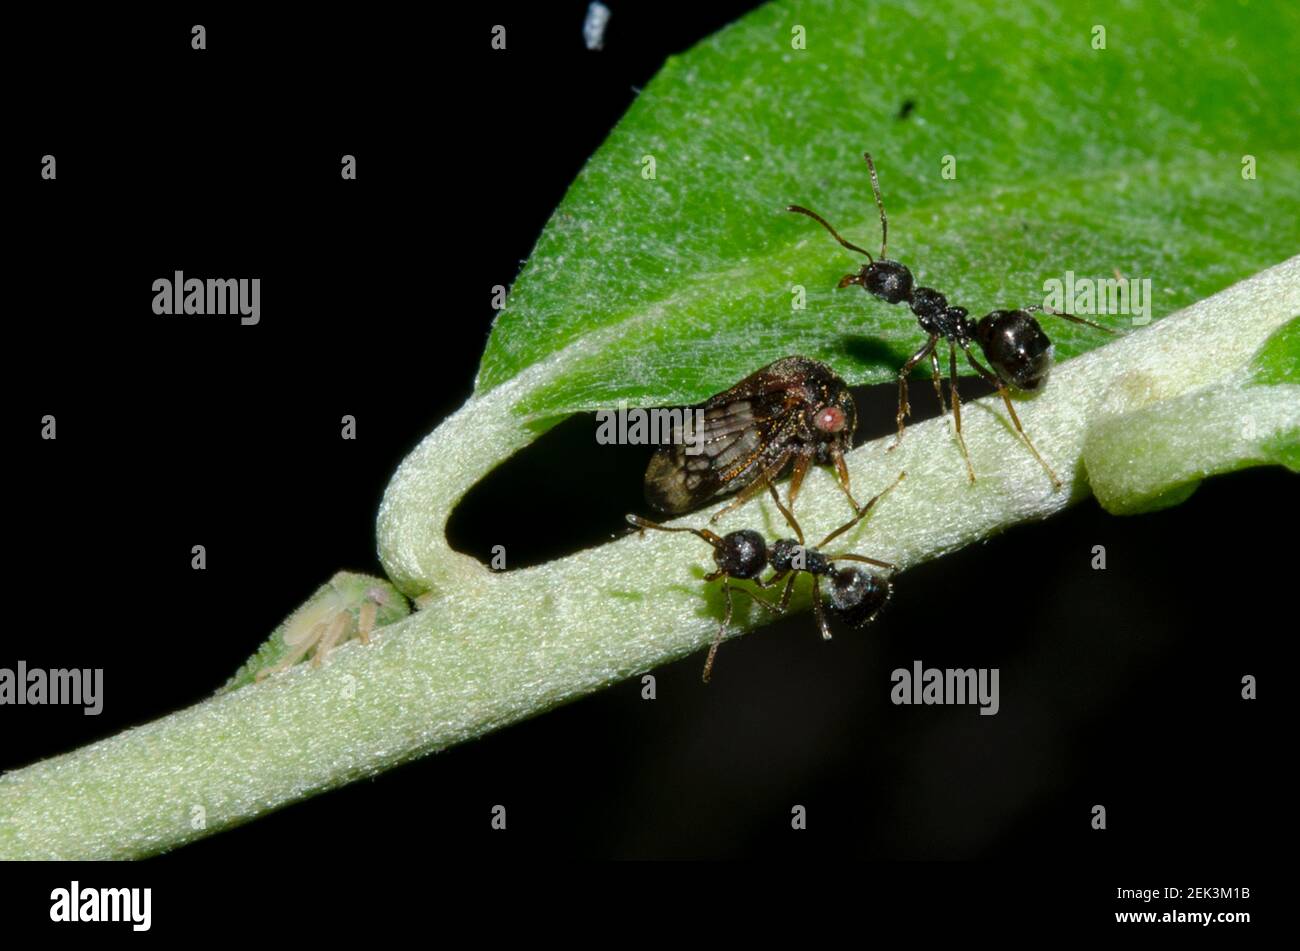 Adult and nymph Treehoppers, Membracidae Family, with Black Weaver Ants, Polyrhachis sp, on stem, Klungkung, Bali, Indonesia Stock Photo